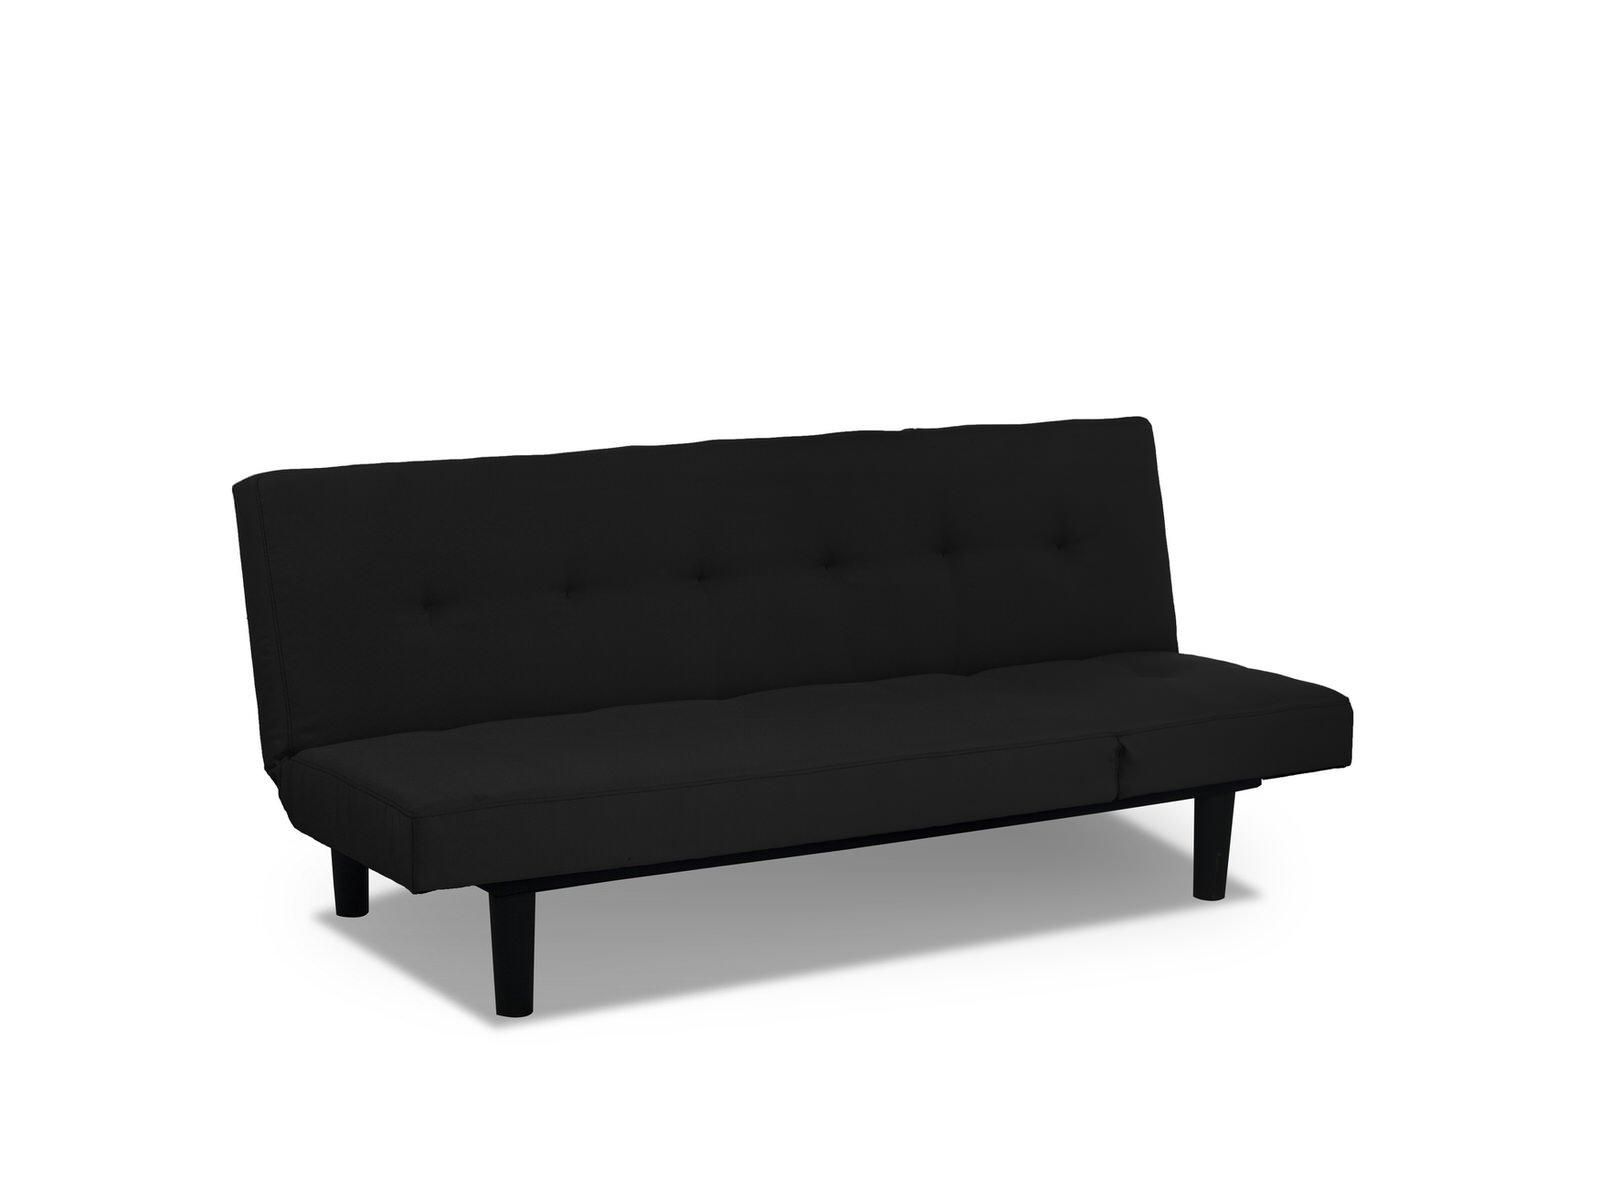 Mini Lounger Convertible Sofa Bed Blackserta / Lifestyle Intended For Mini Sofa Beds (View 17 of 20)